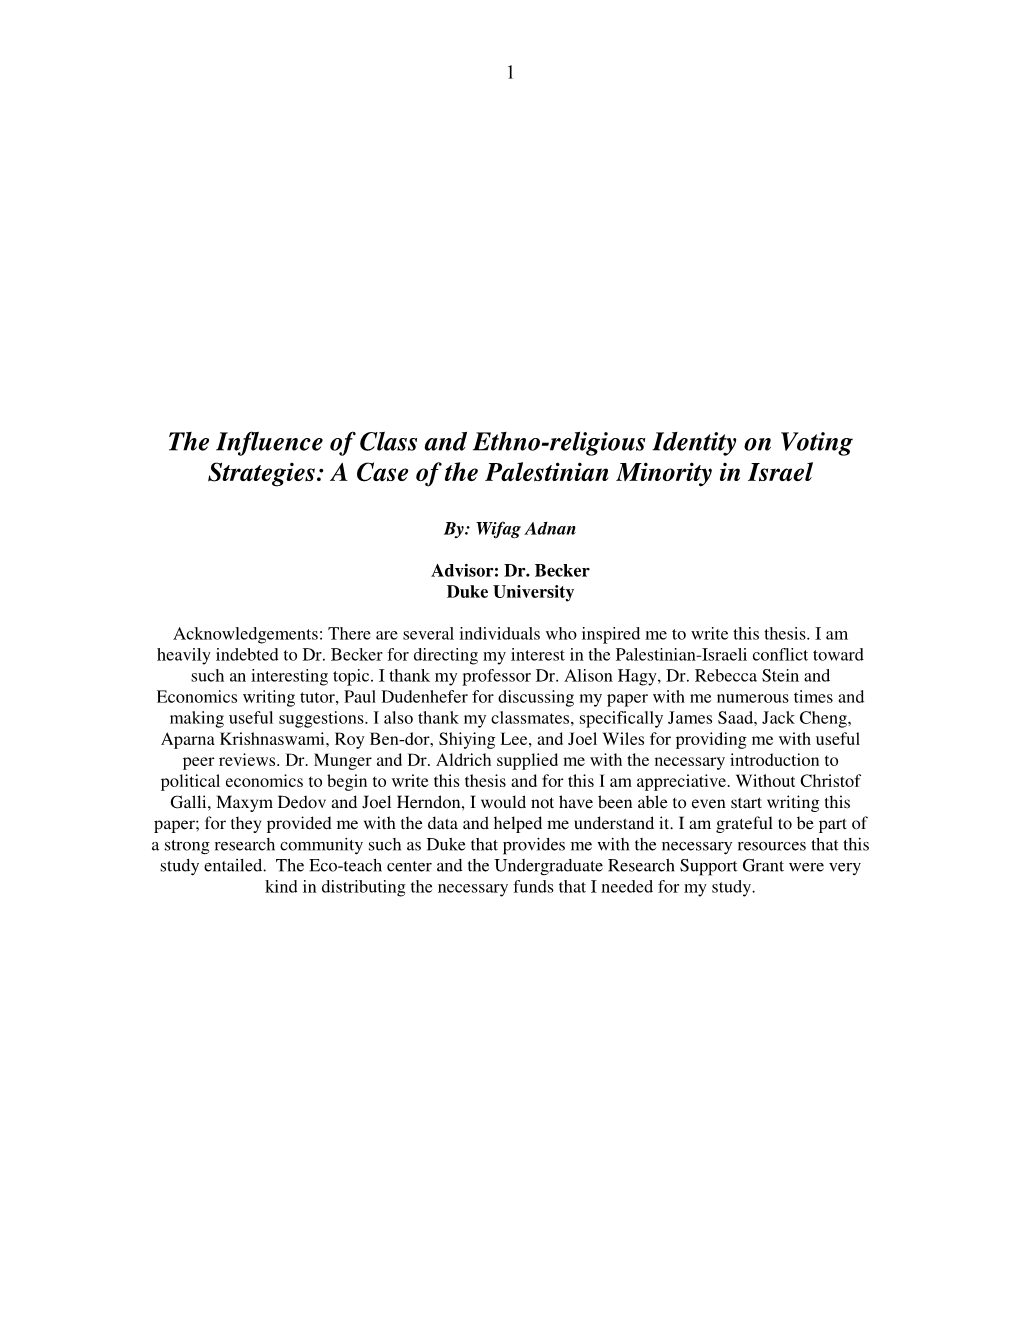 The Influence of Class and Ethno-Religious Identity on Voting Strategies: a Case of the Palestinian Minority in Israel